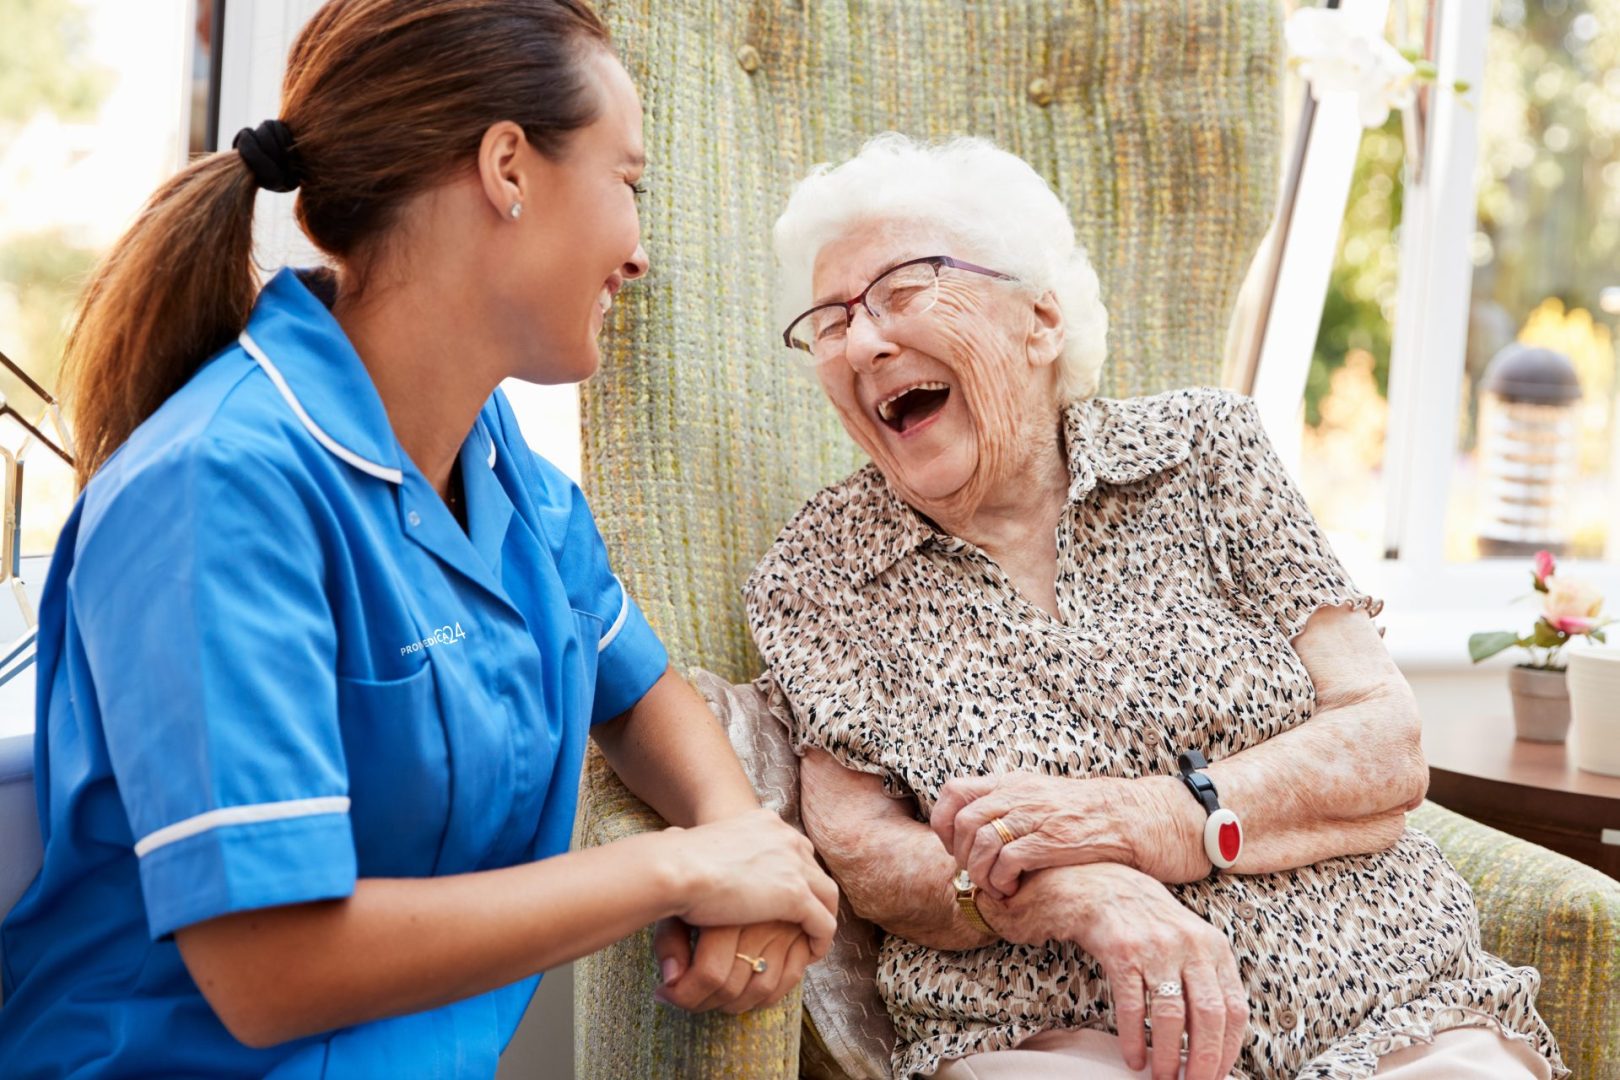 The importance of continuity of care